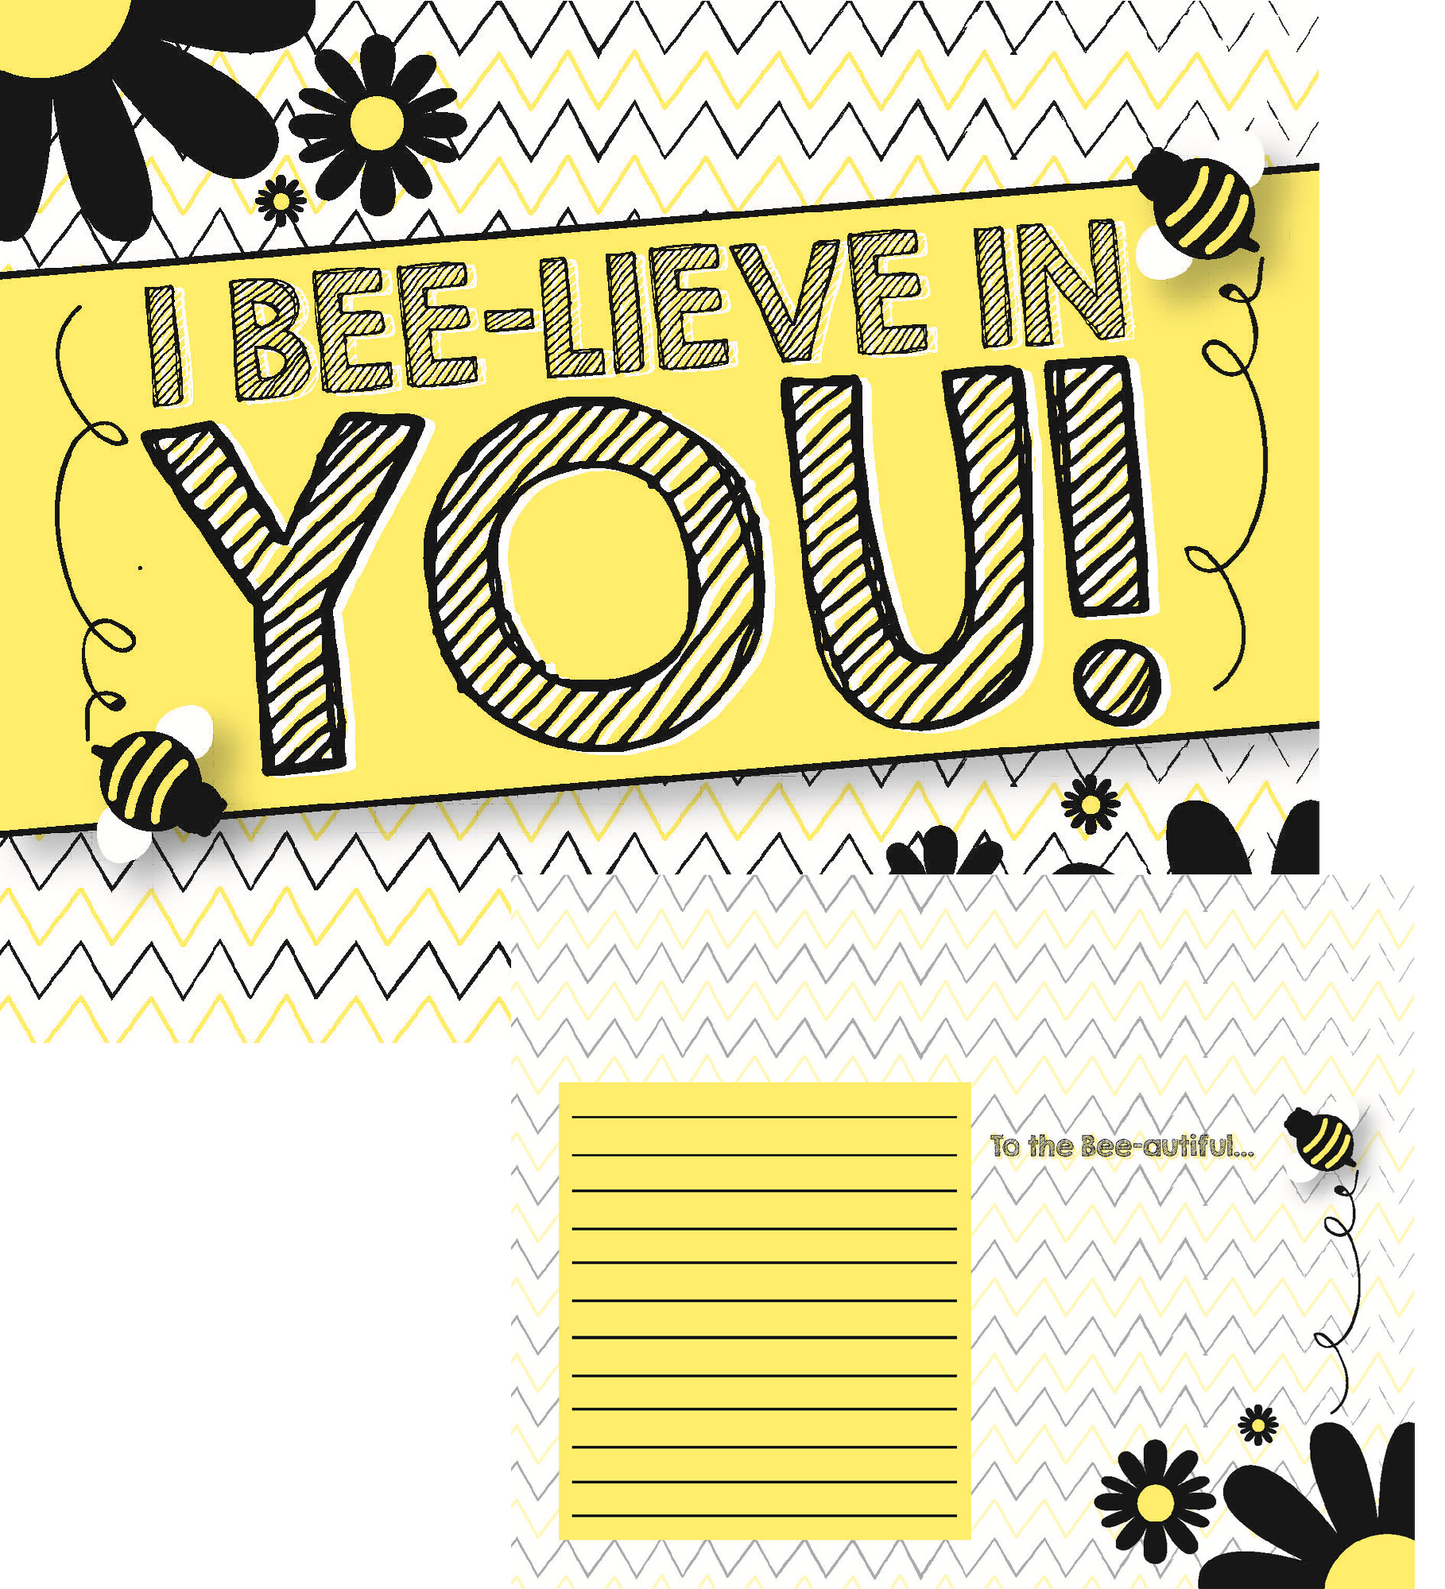 "I Bee-lieve In You!" post cards in Yellow, in two styles